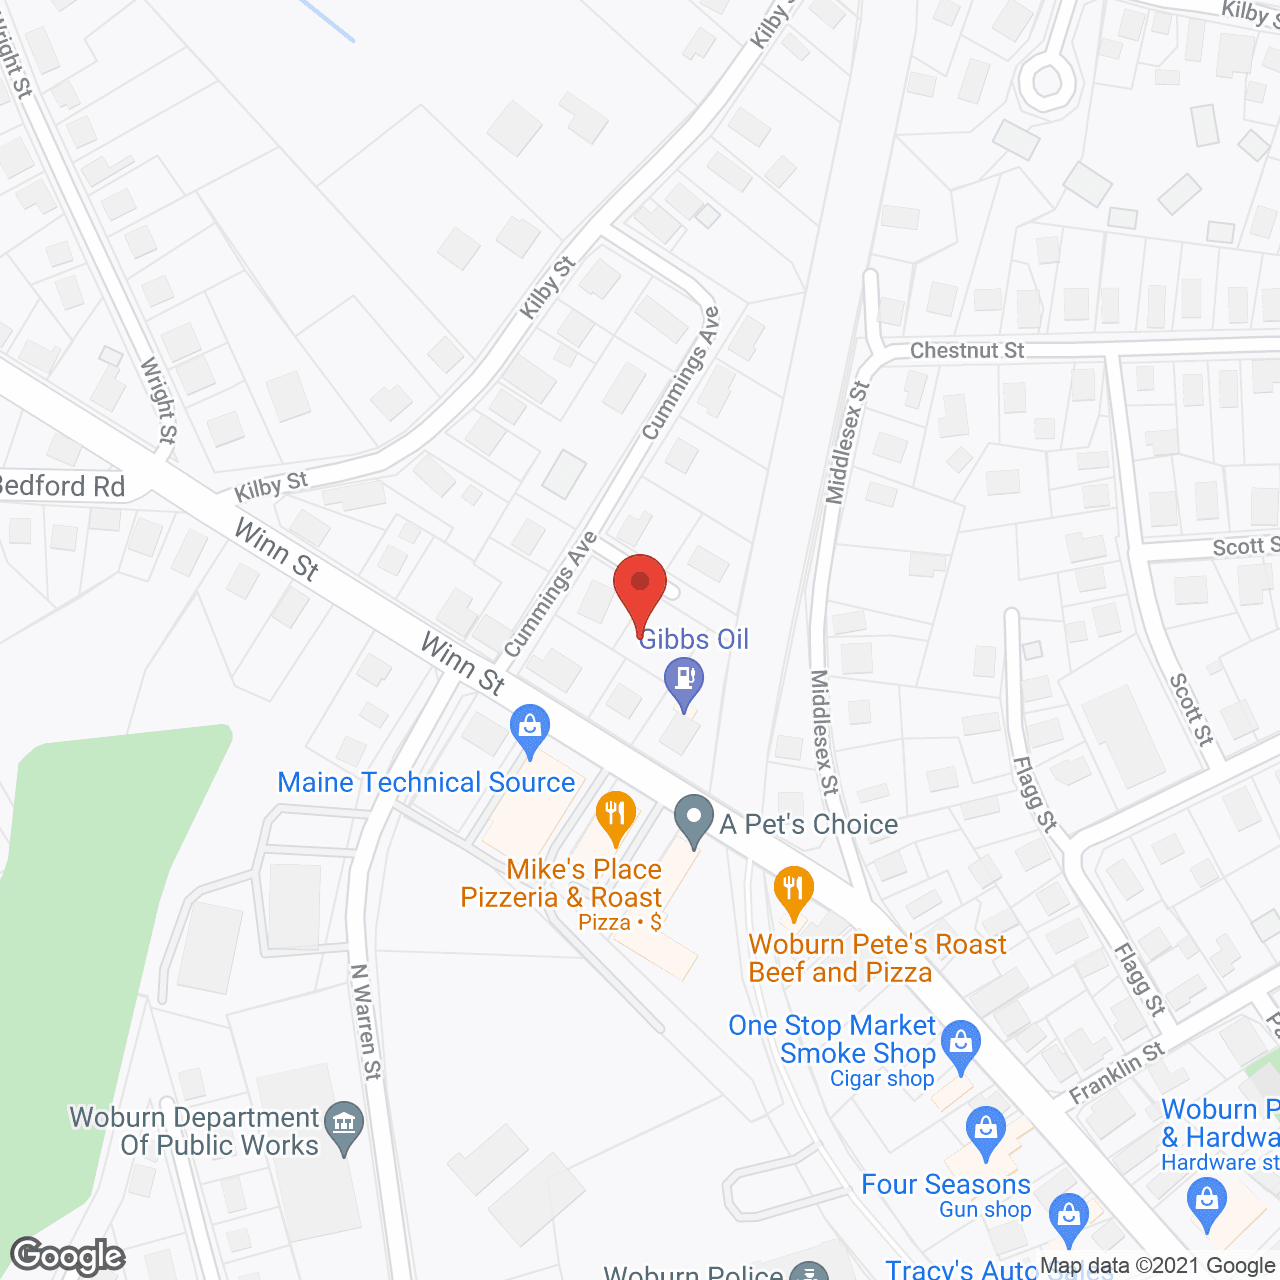 Nurses At Home, Inc in google map